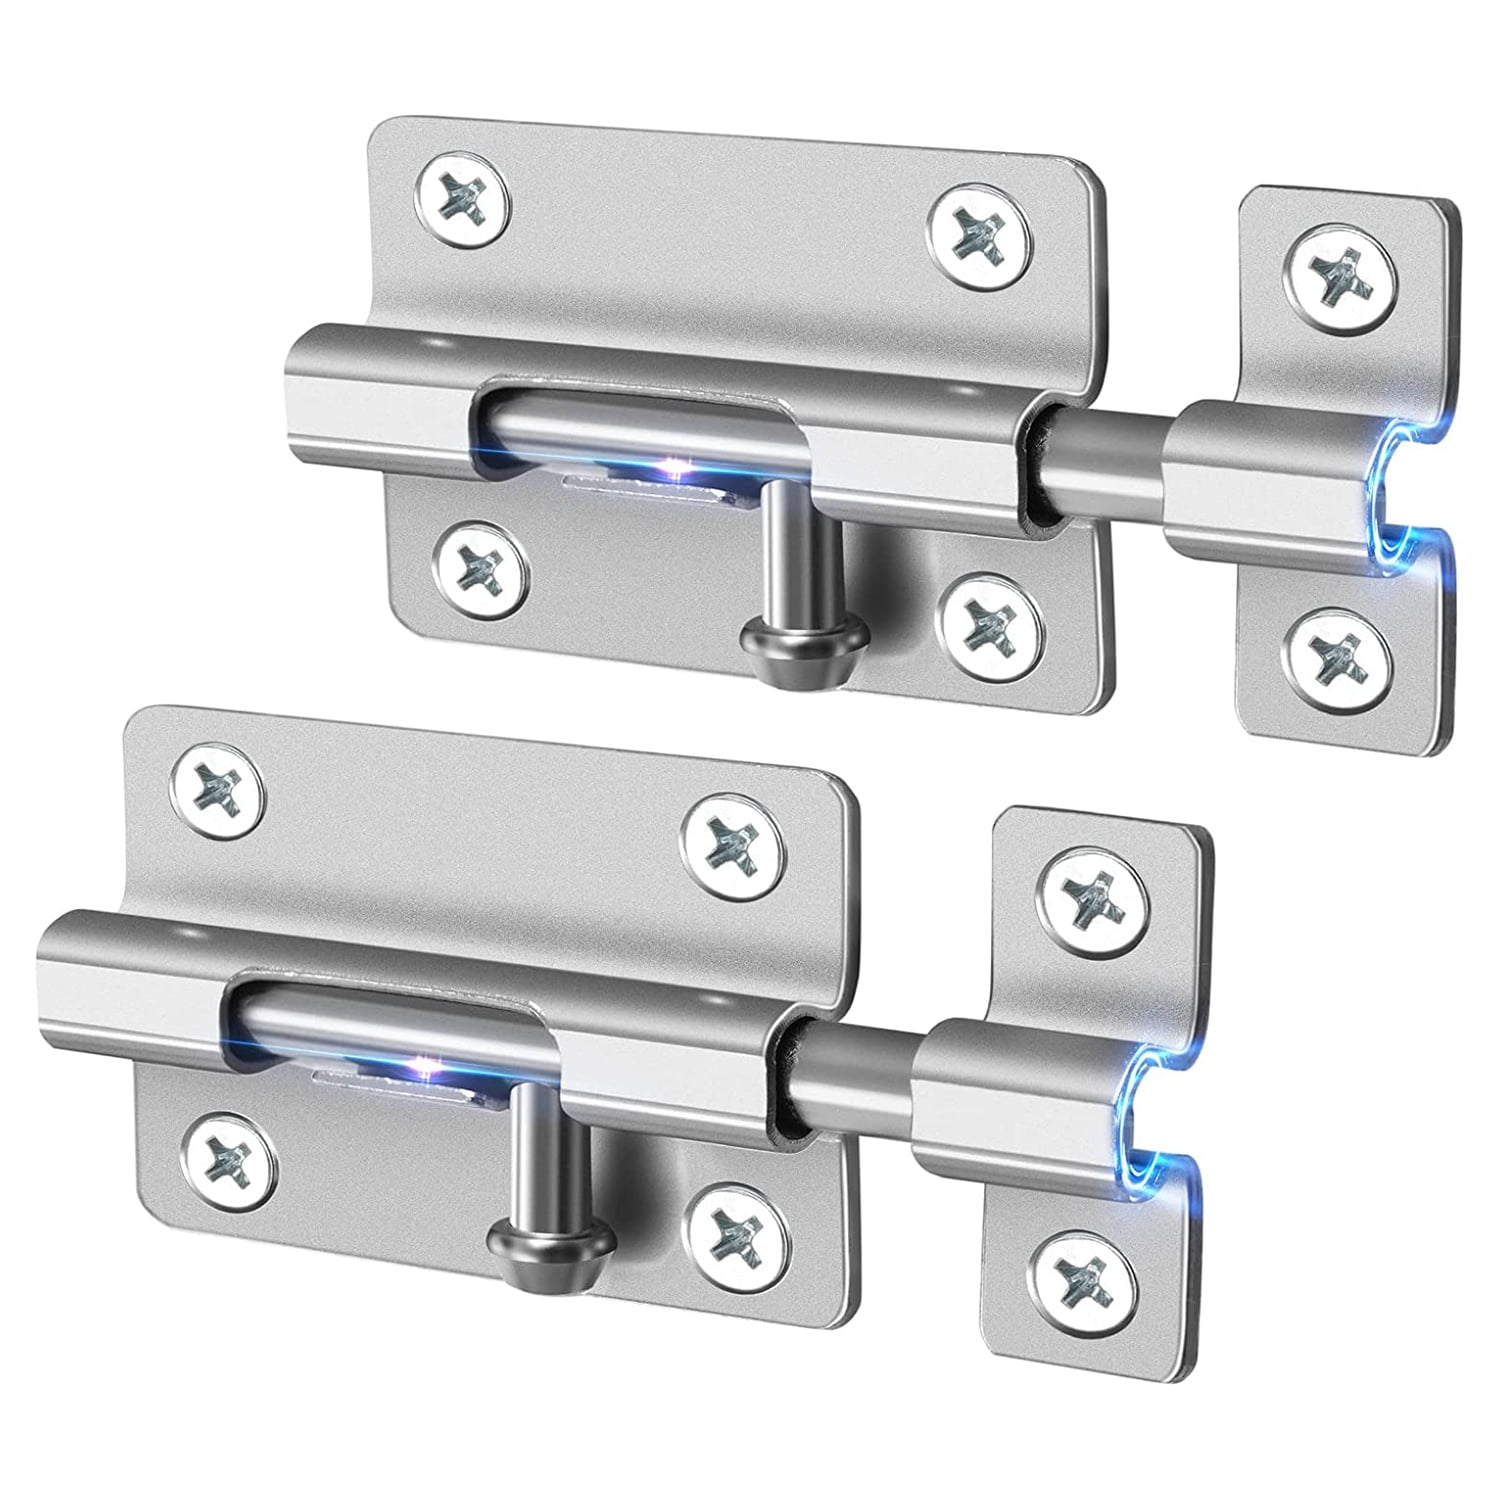 2 Pack with 12 Screws Door Security Slide Latch Lock Protect Your Security and Privacy Upgrade 3 Inches Thickened Stainless Steel Sliding Door Lock 